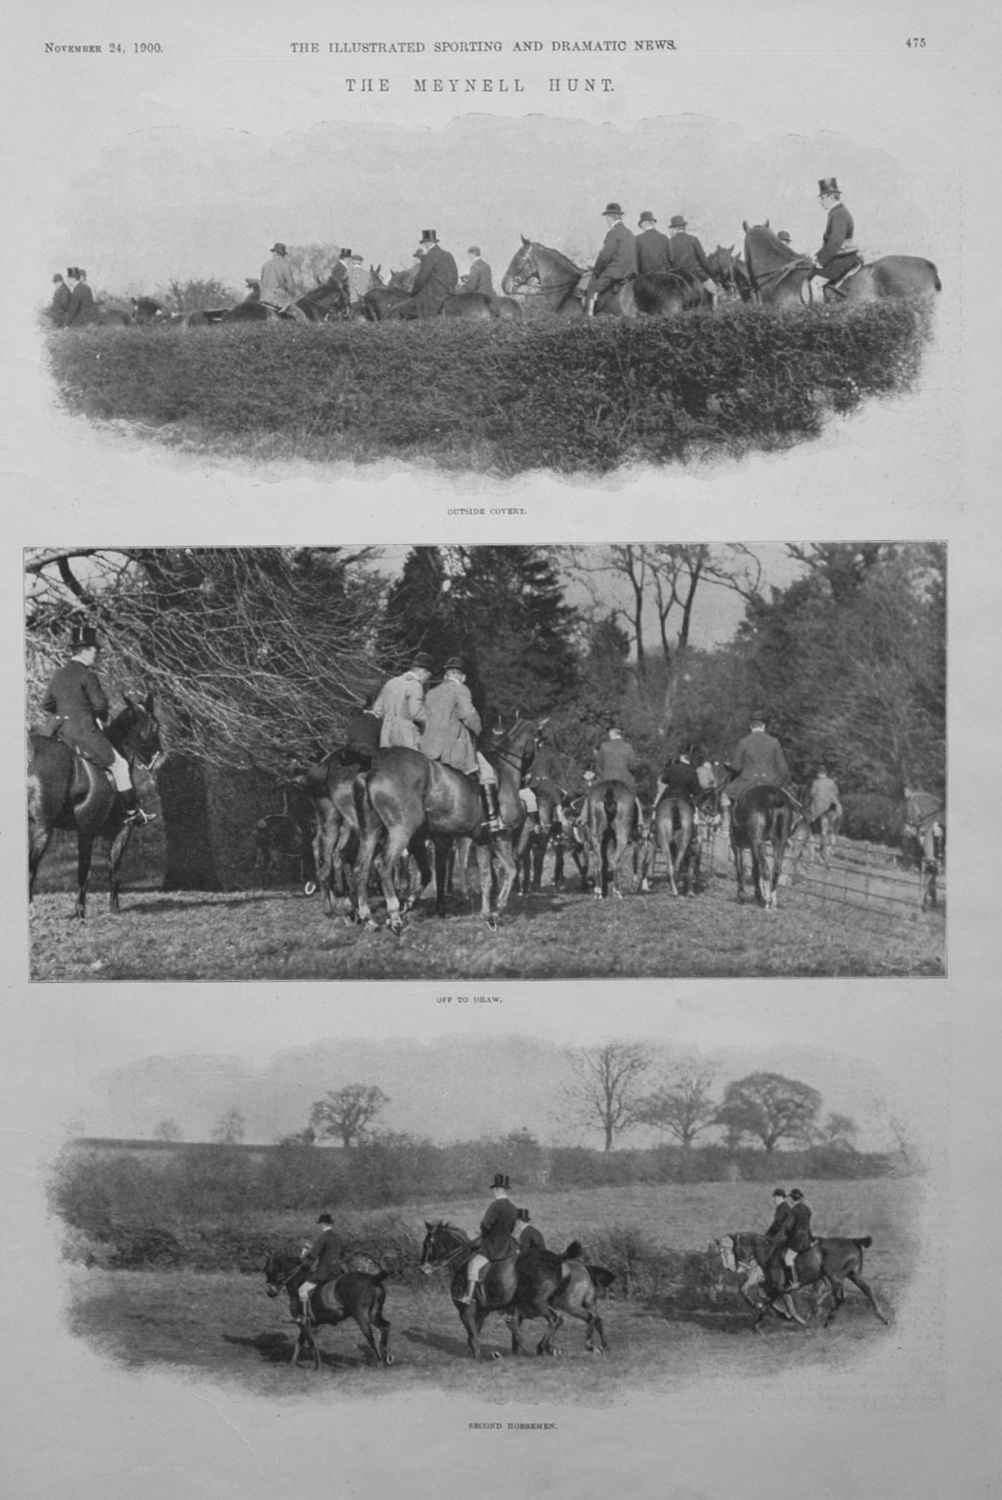 The Meynell Hunt. 1900